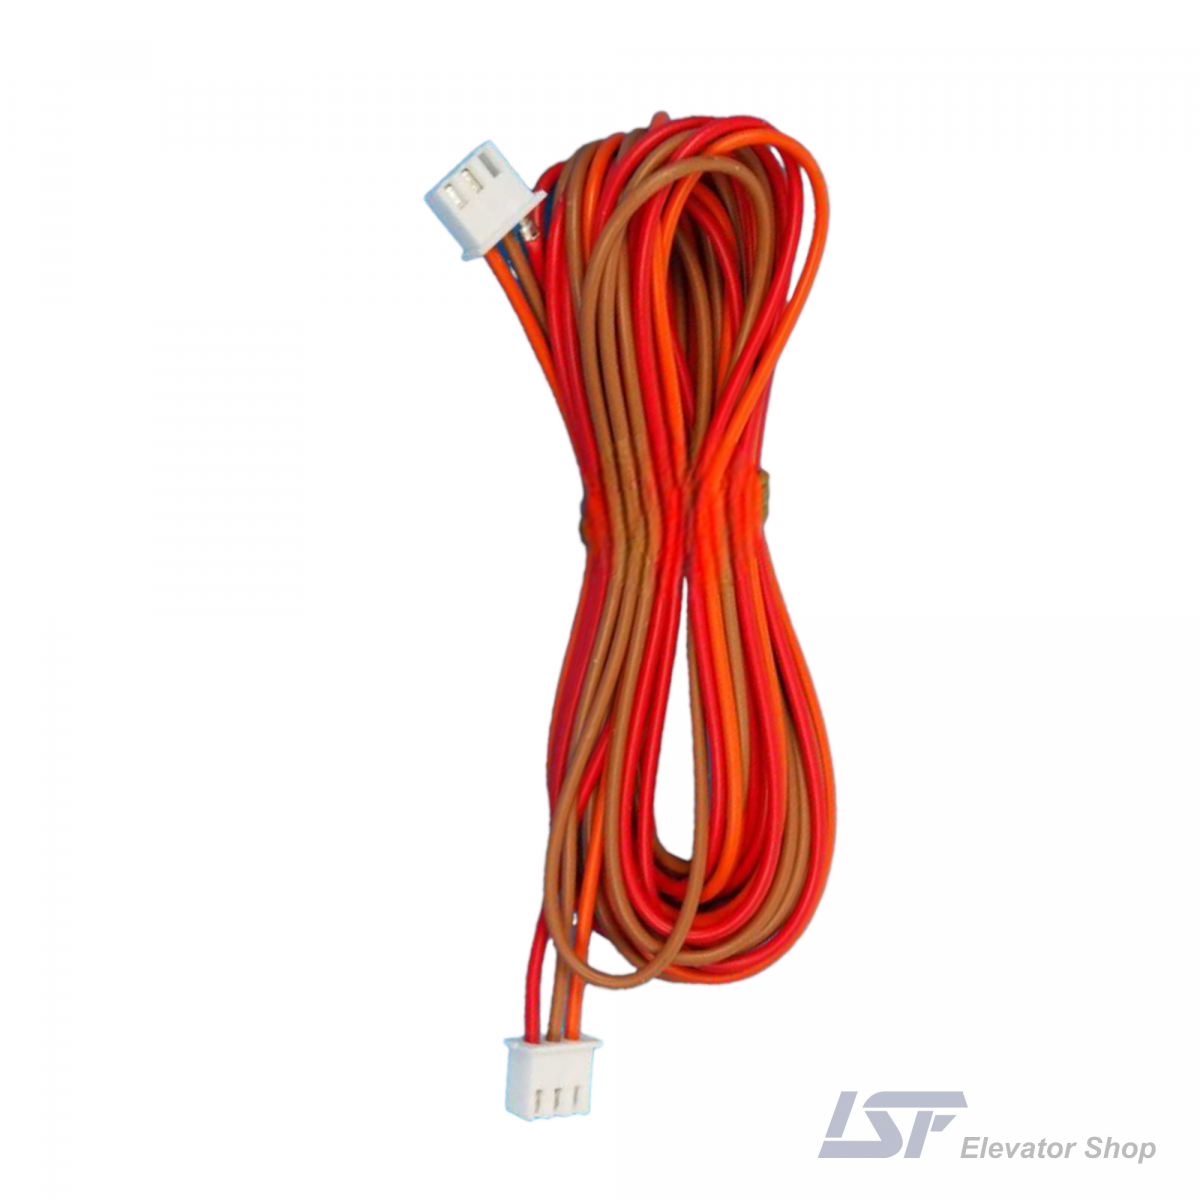 Arkel KBL-BT4 Button Cable 150cm (Two End With Female Connectors) 3